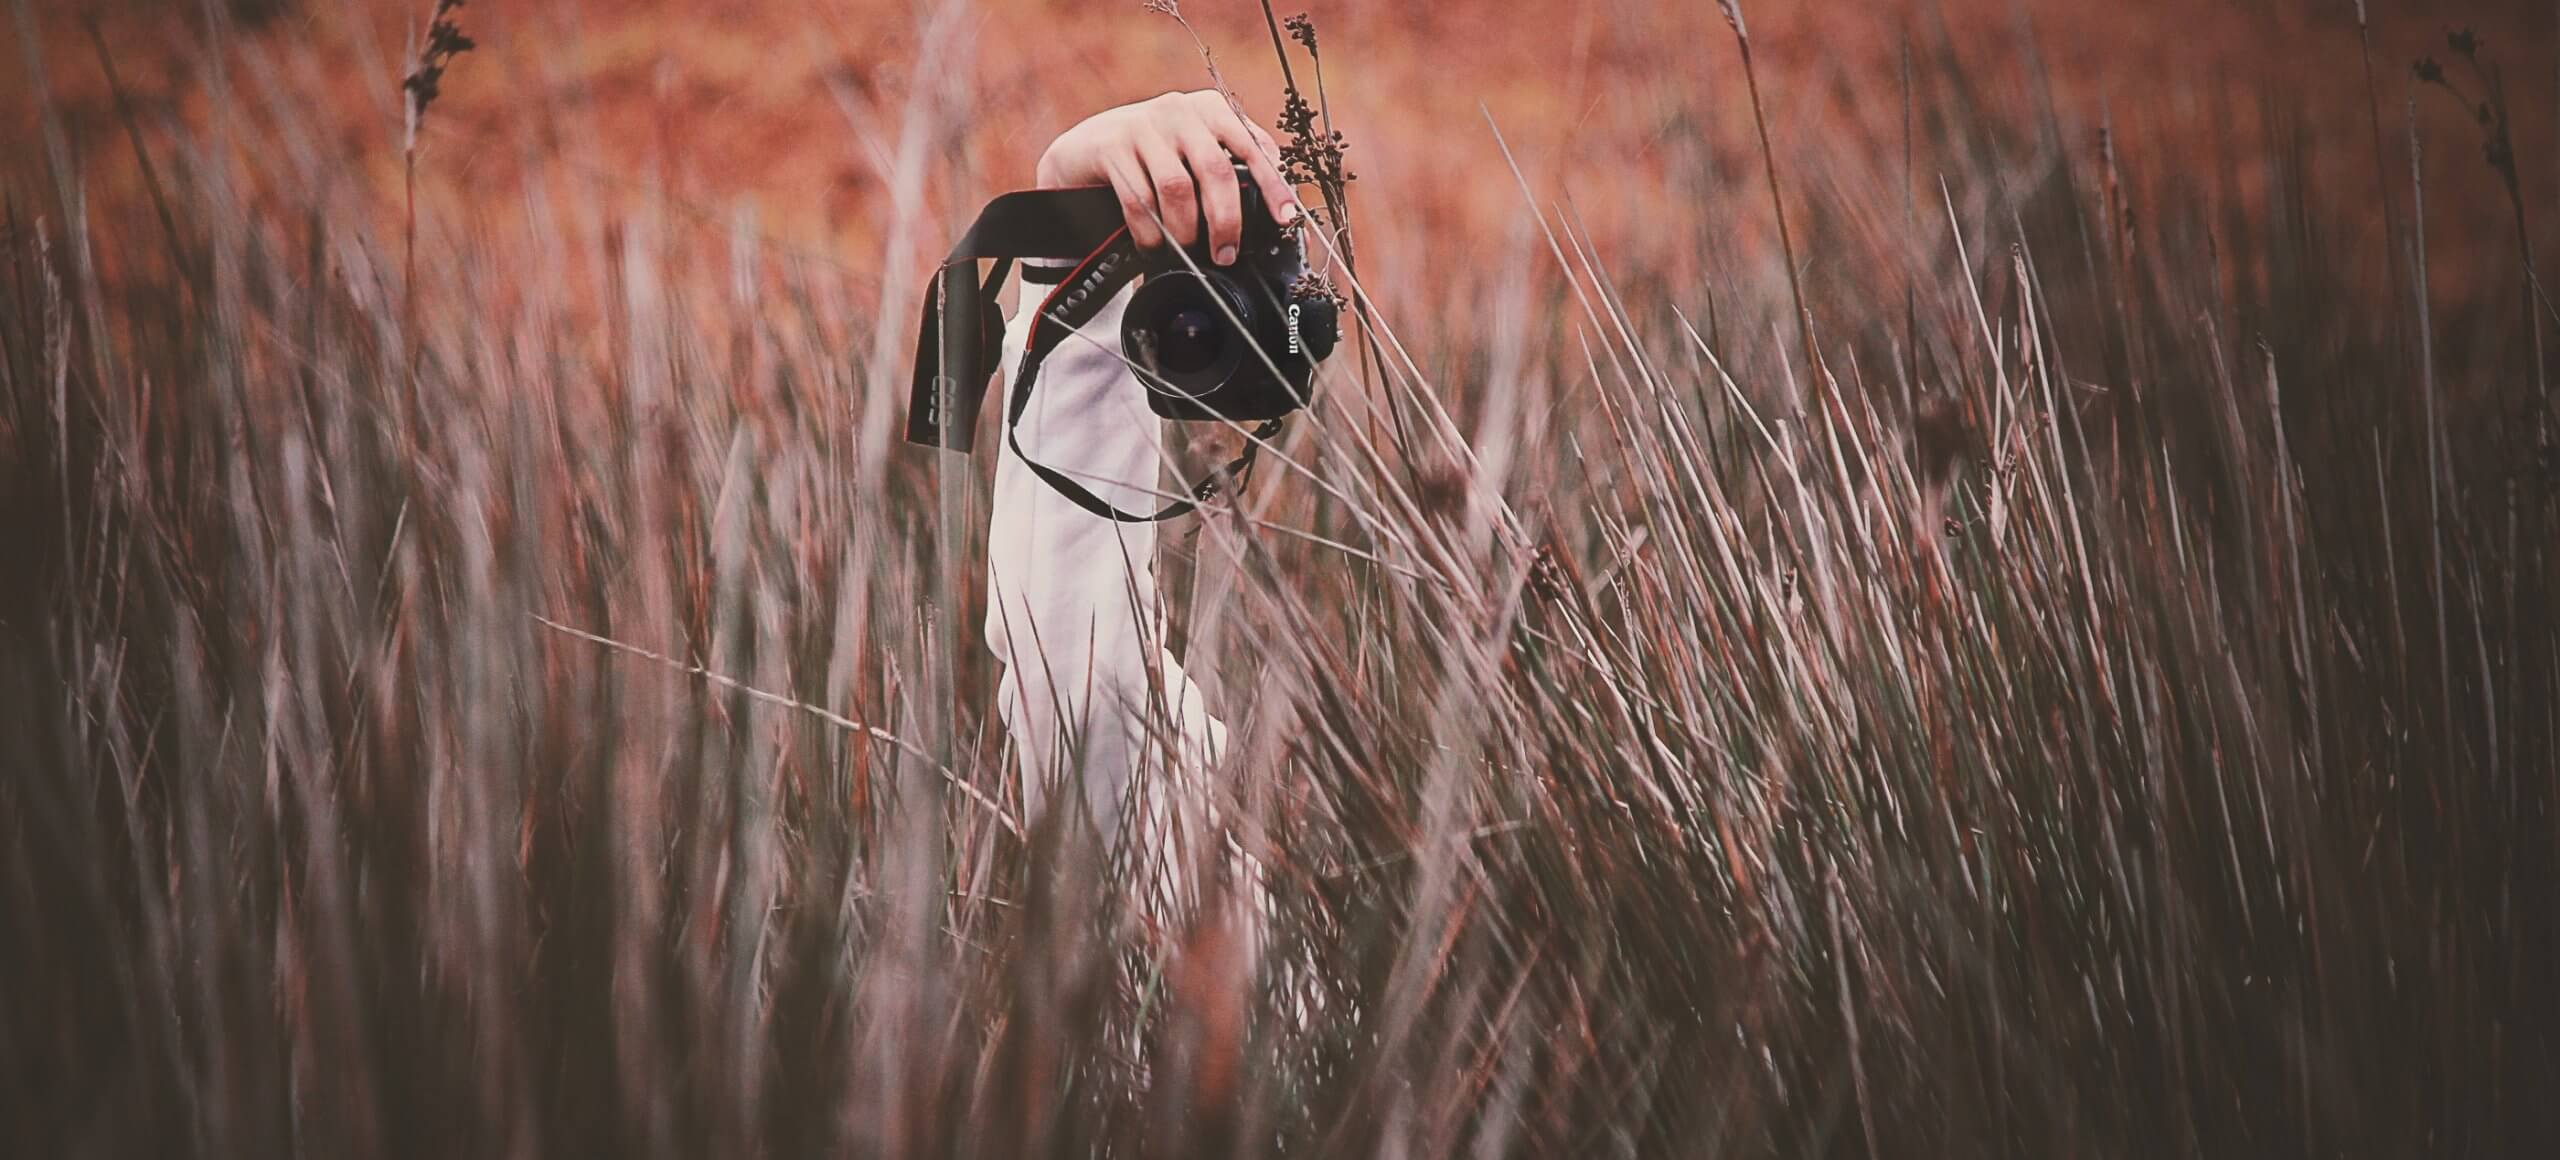 A person holds a camera up in a field of tall brown grass.